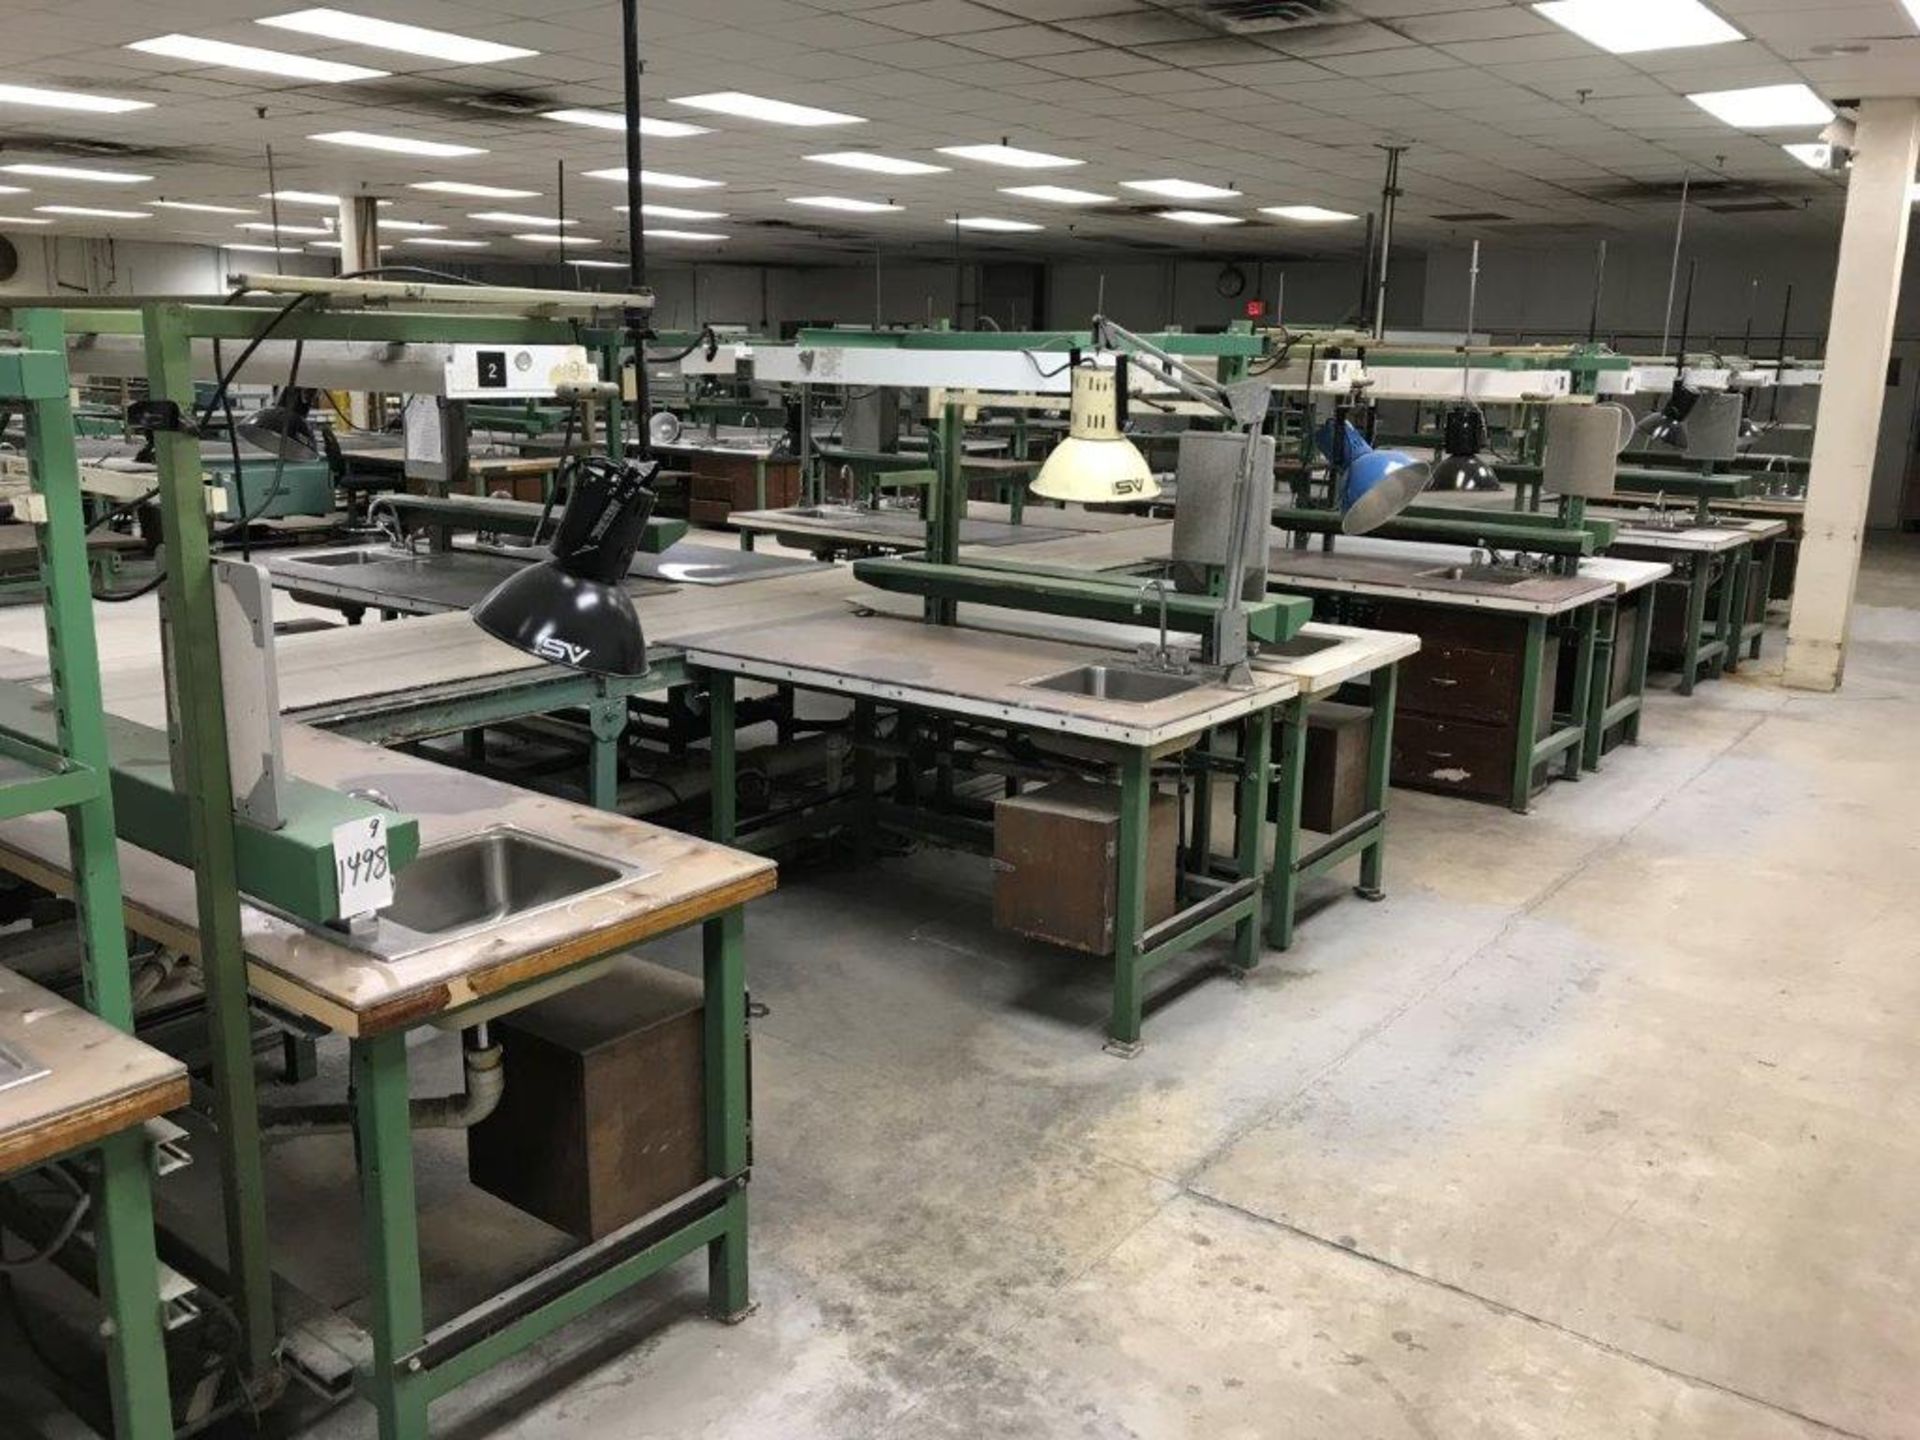 (9) Lighted Work Benches with Sink & Electric